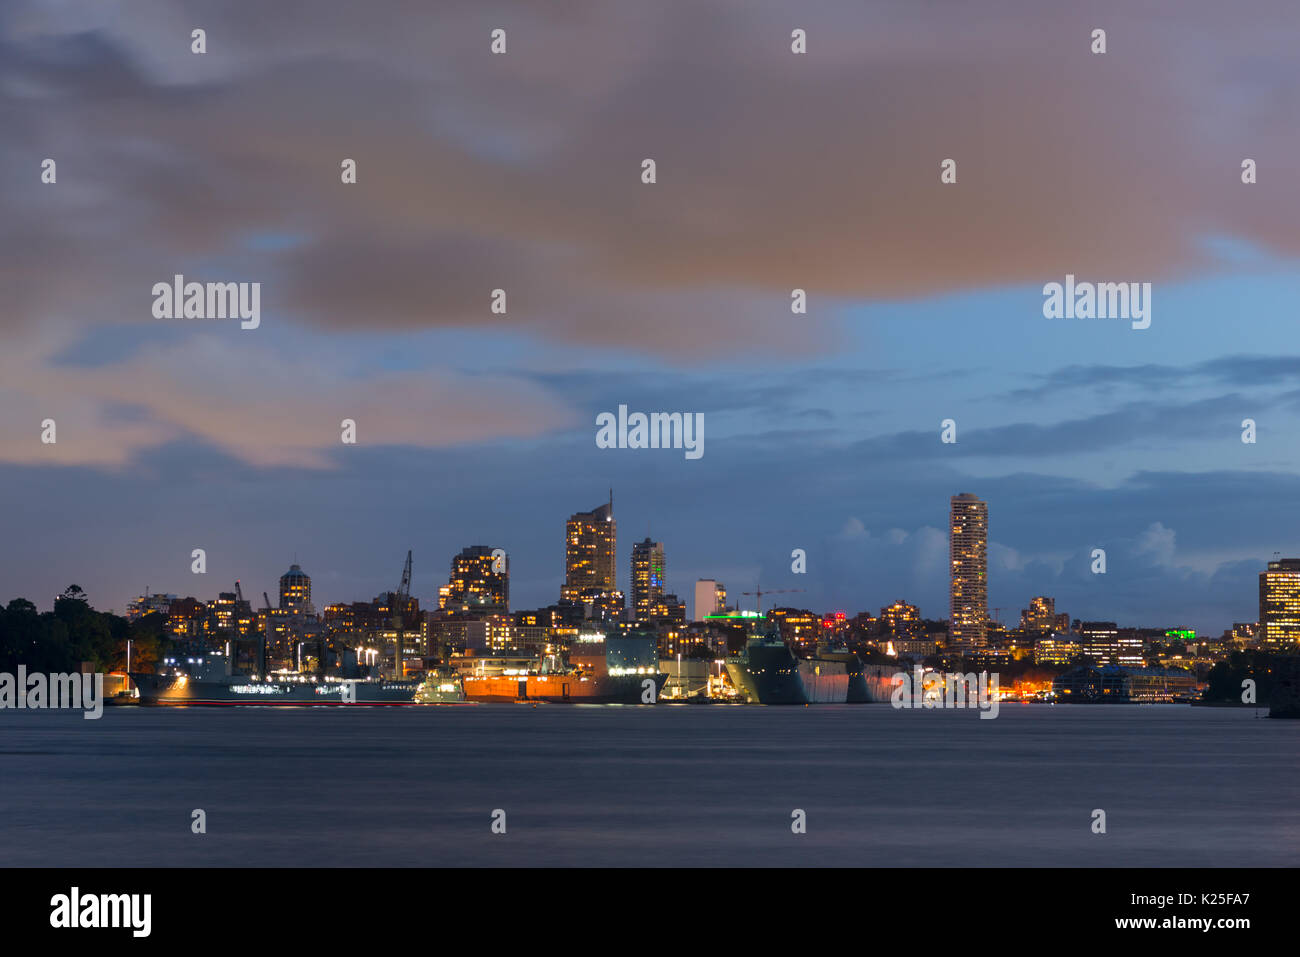 Garden Island Naval base and Potts Point skyline at dusk, seen from Cremorne point. Sydney Harbour, New South Wales, Australia. Stock Photo